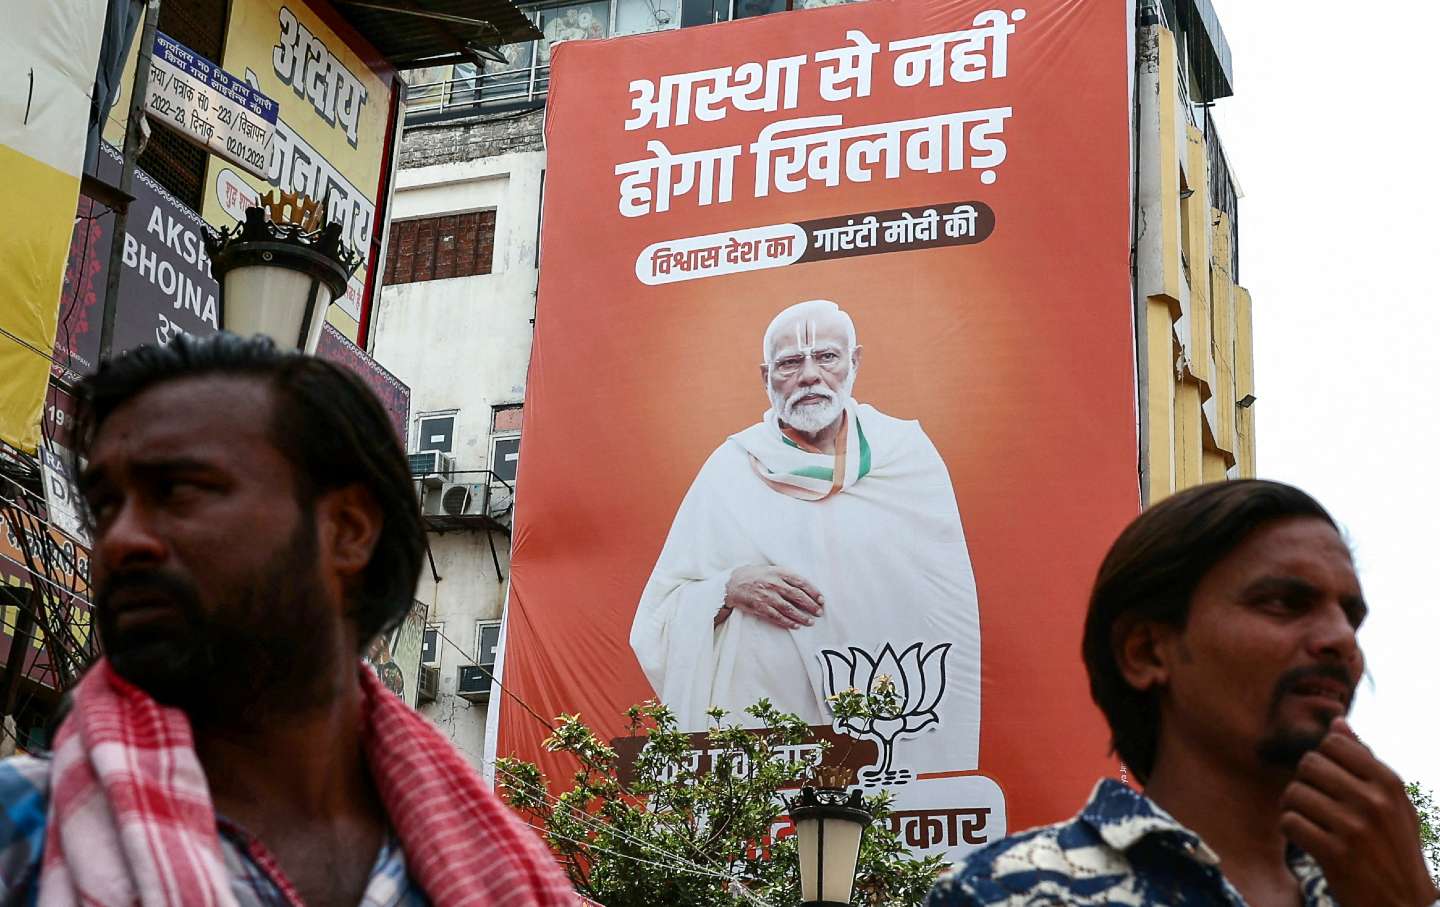 Men stand in front of an election campaign hoarding of the Bharatiya Janata Party featuring Indian Prime Minister Narendra Modi, in Varanasi on April 10, 2024, ahead of India's upcoming general elections.